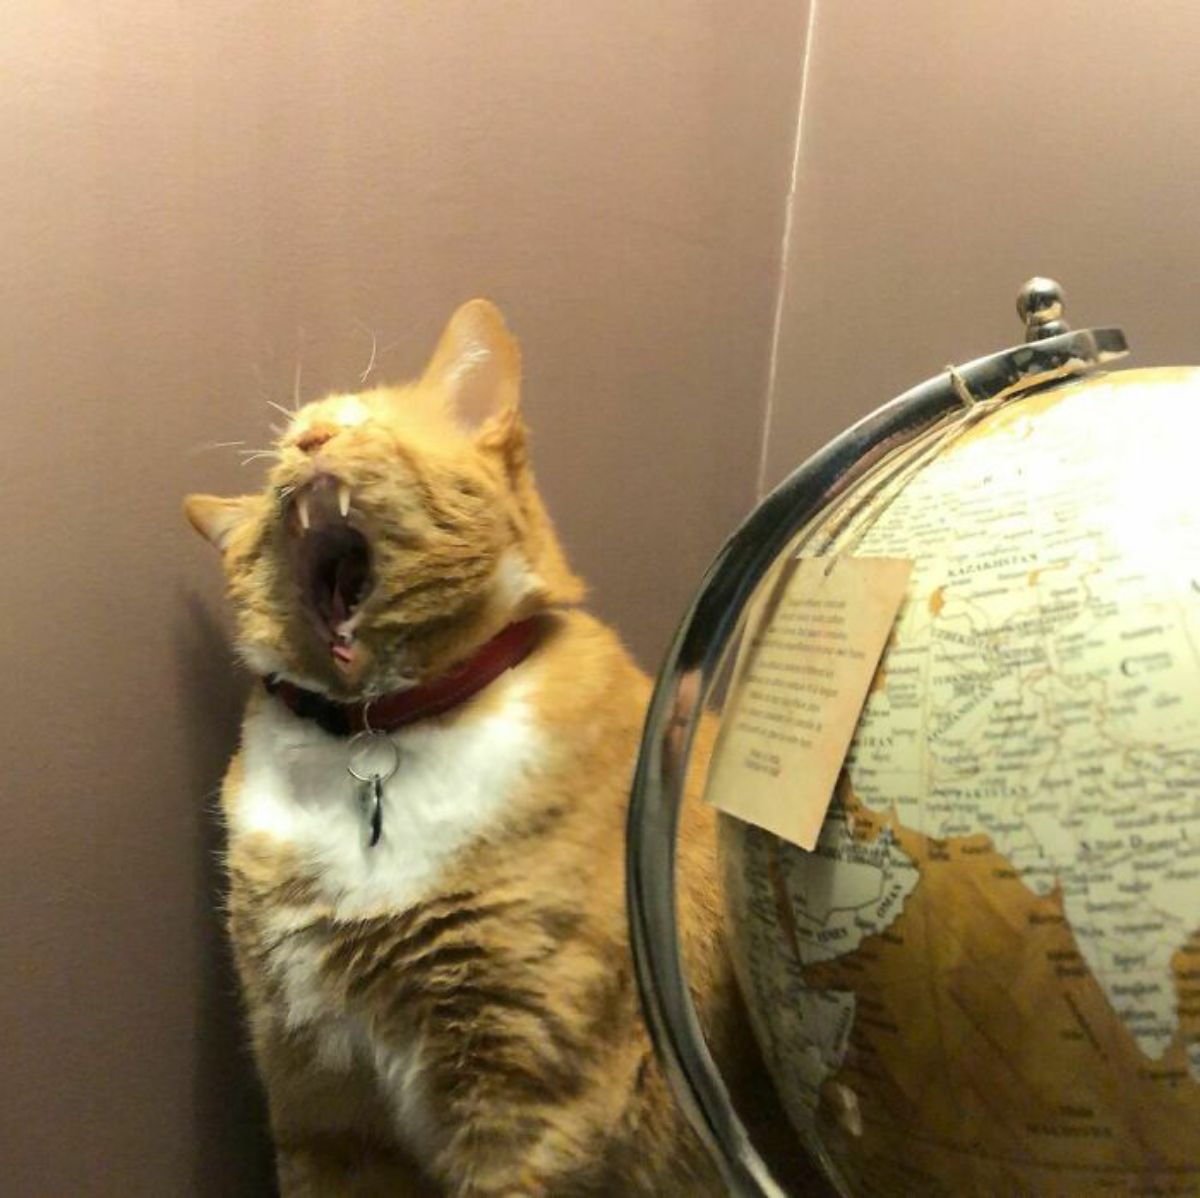 panoramic fail of orange and white cat yawning next to a globe and the cat's mouth is messed up